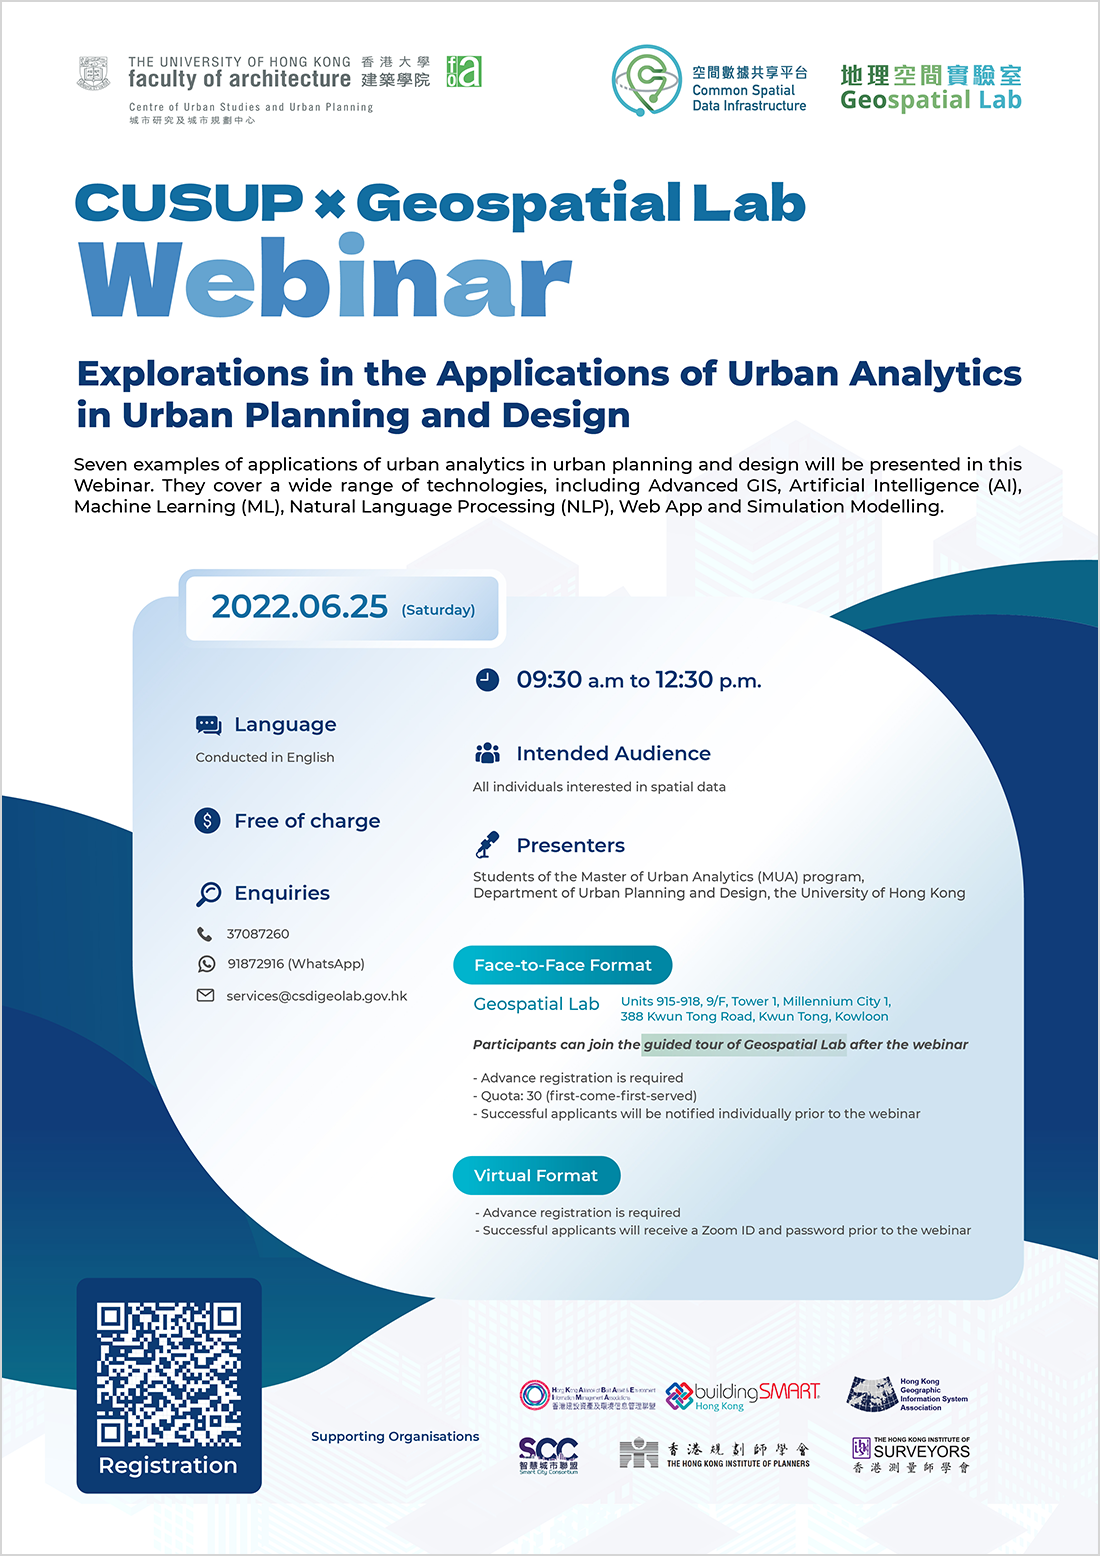 CUSUP X Geospatial Lab Webinar Explorations in the Applications of Urban Analytics in Urban Planning and Design